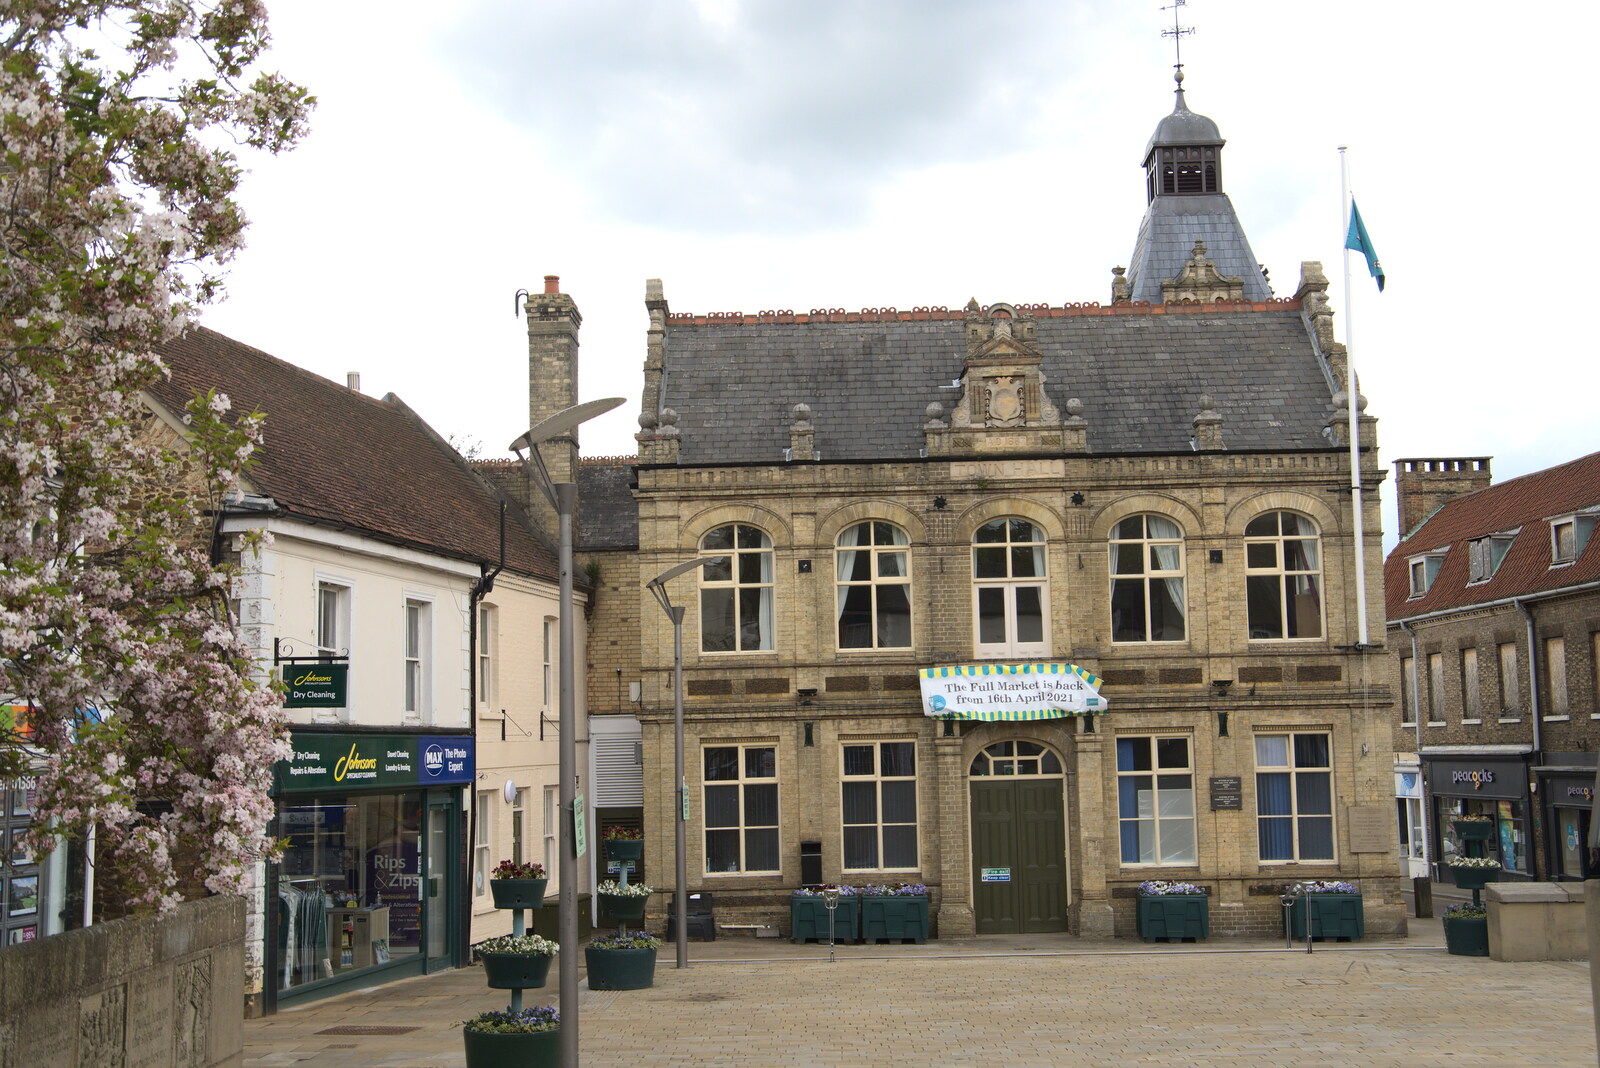 Downham Market's Town Hall from A Vaccination Afternoon, Swaffham, Norfolk - 9th May 2021